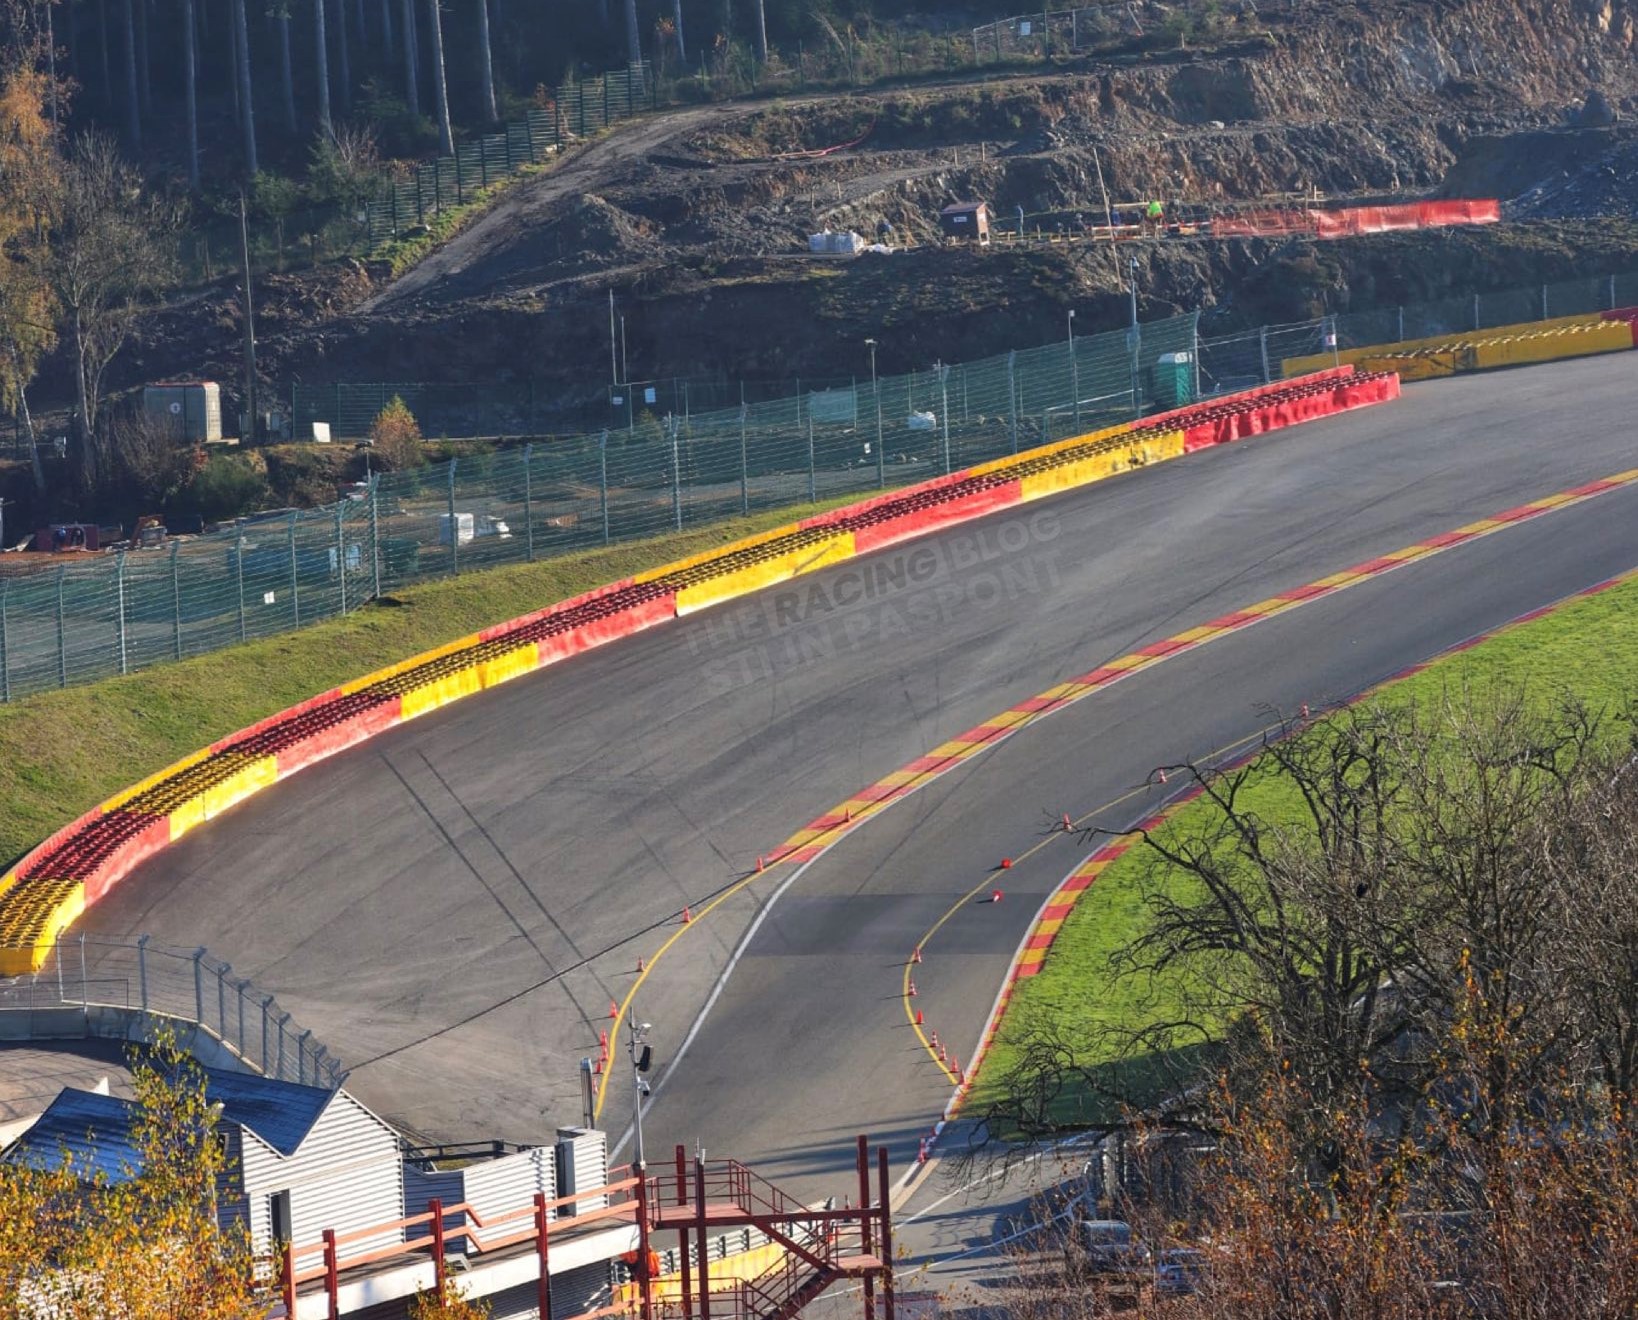 Local drivers test the new Eau Rouge section at Spa-Francorchamps